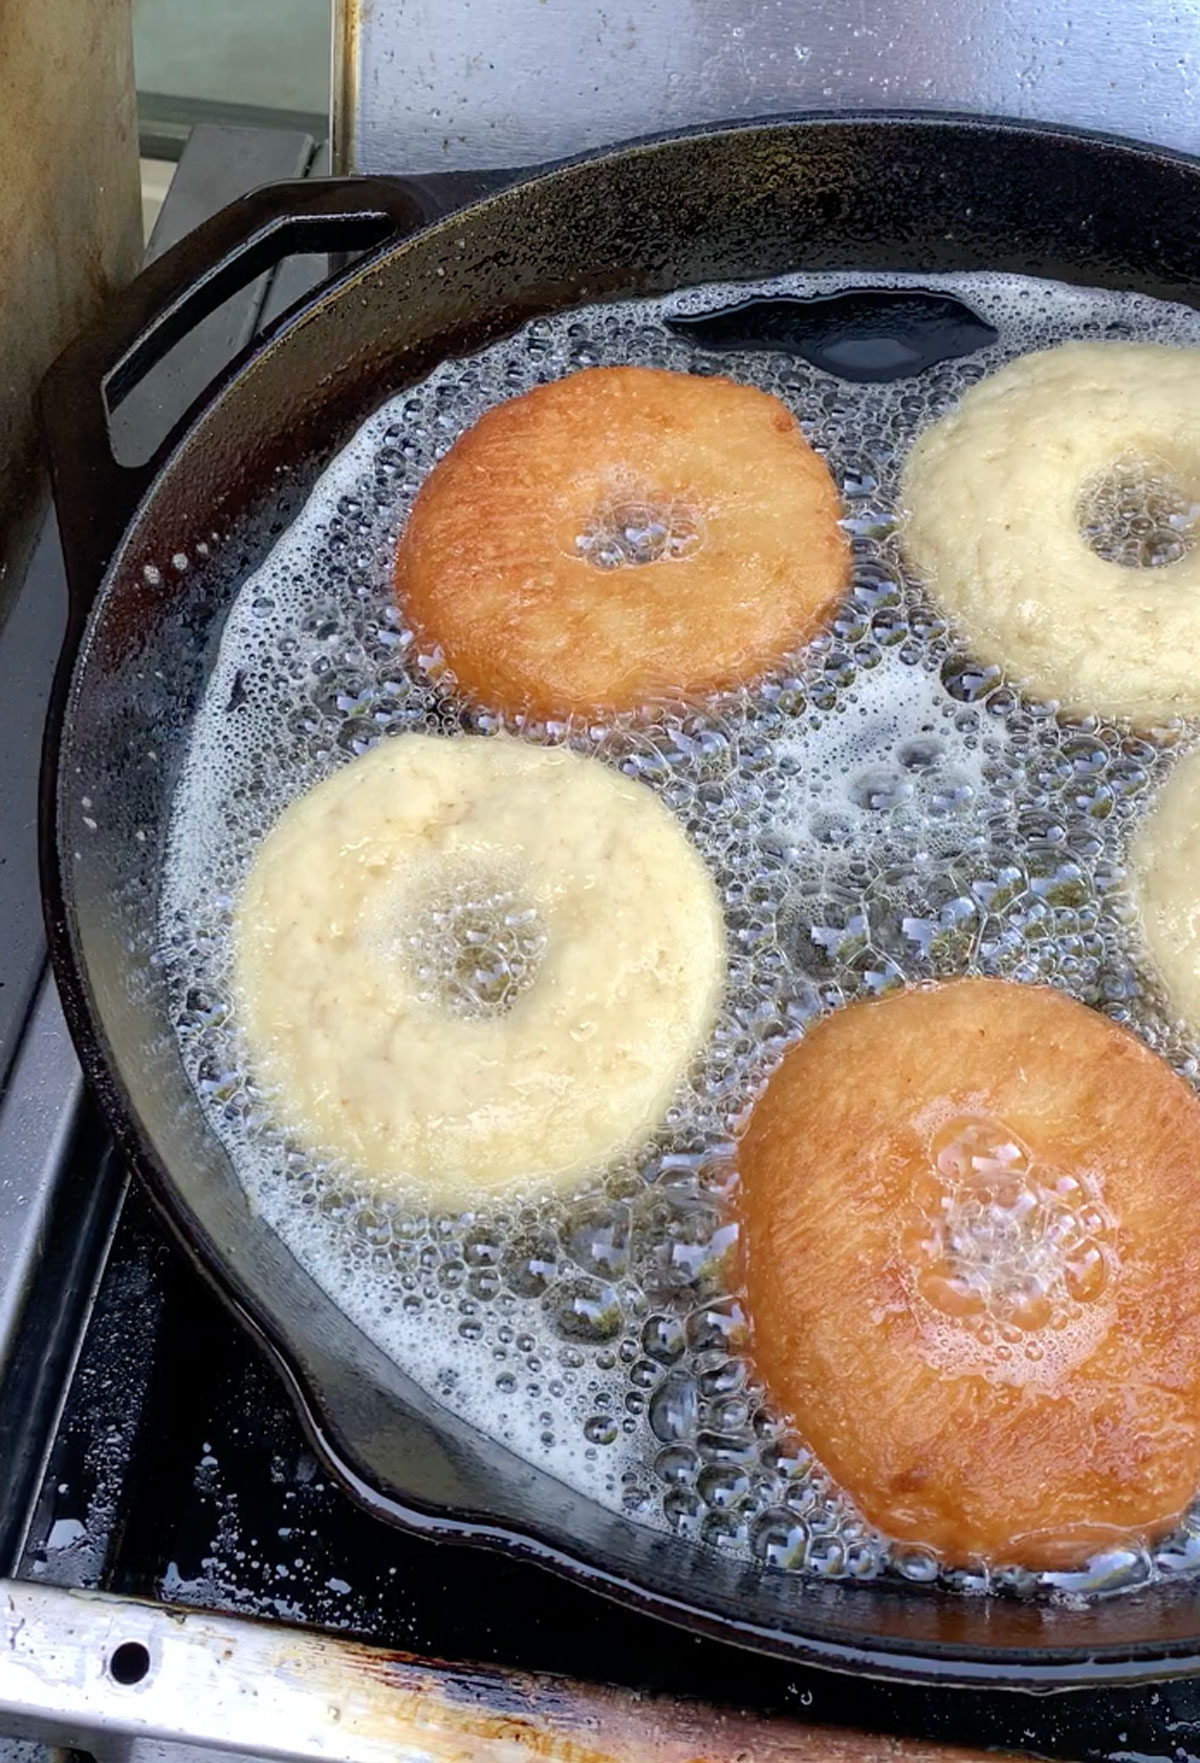 Frying donuts in a large cast-iron skillet.